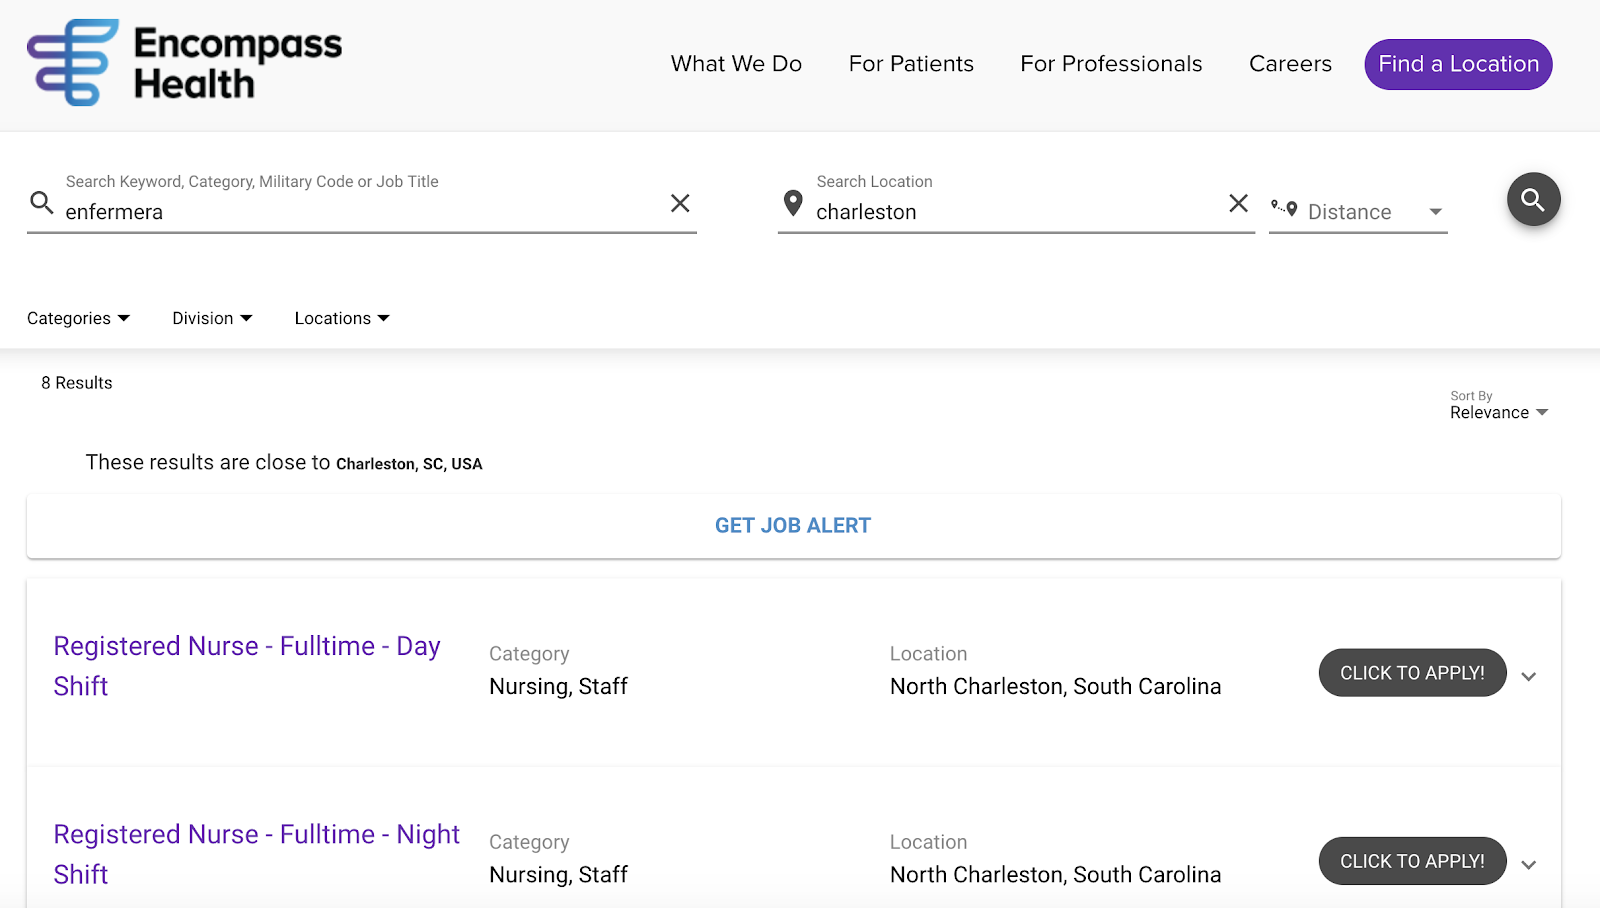 Google’s Cloud Talent Solution Adds New Search Functionalities to Improve Candidate Matching